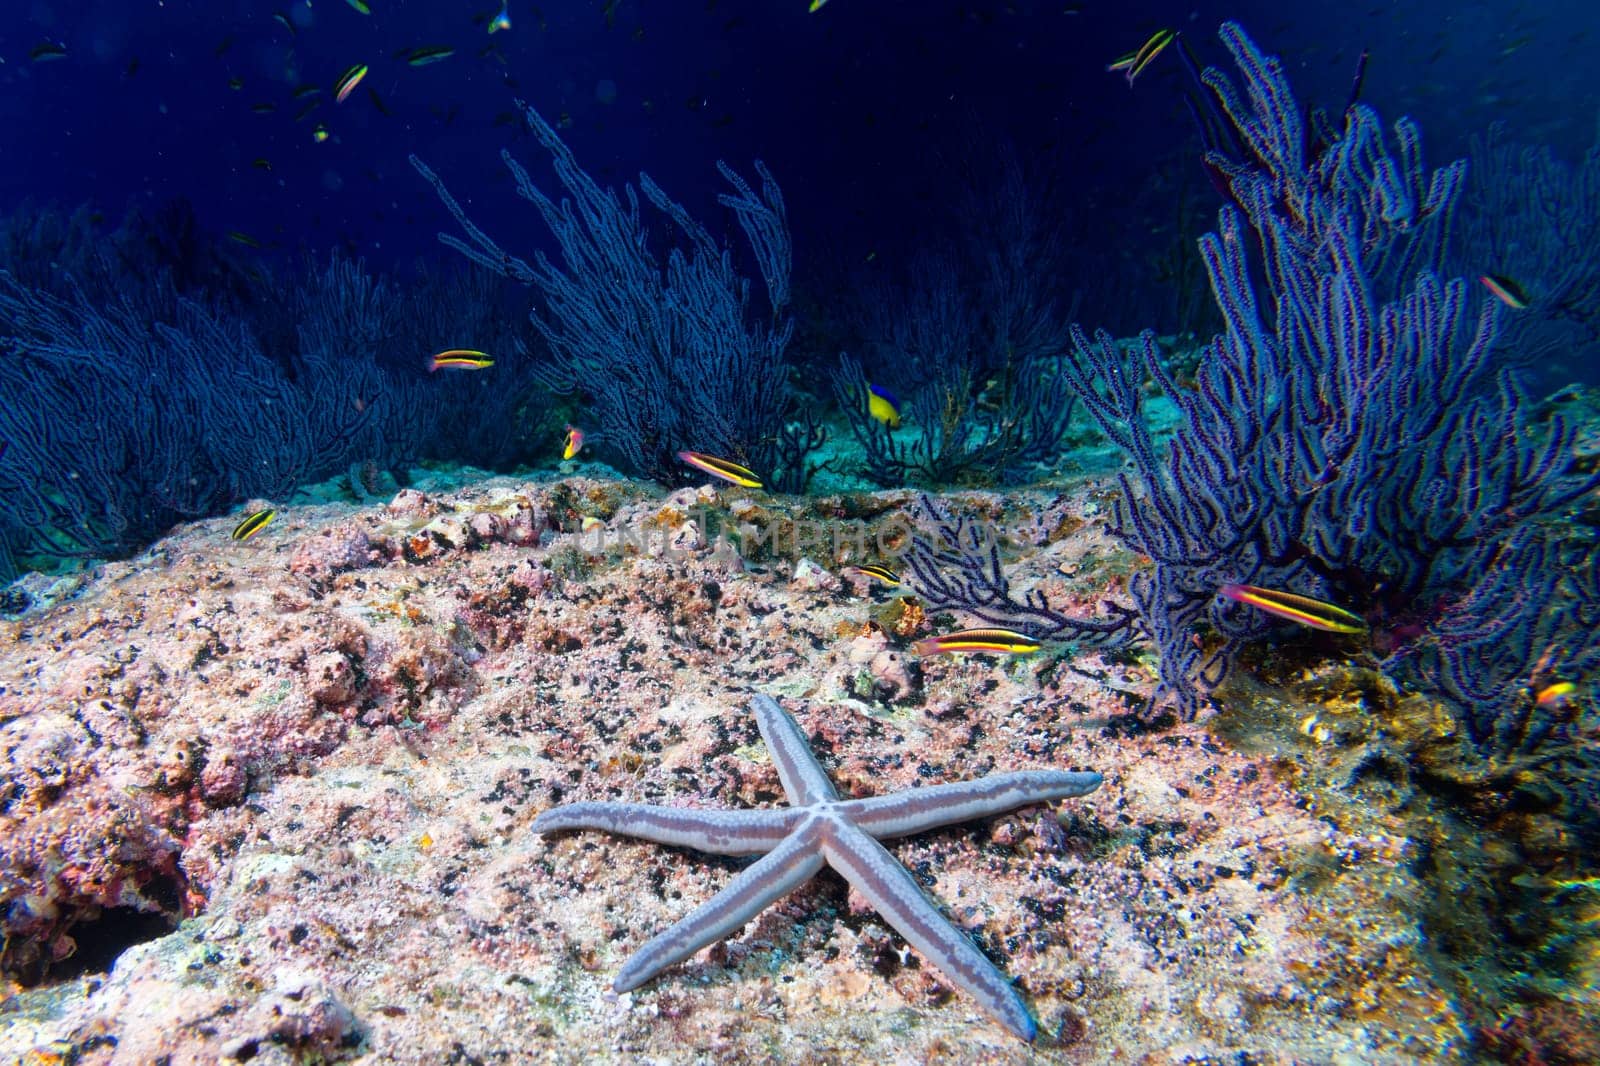 sea stars in a reef colorful underwater landscape by AndreaIzzotti